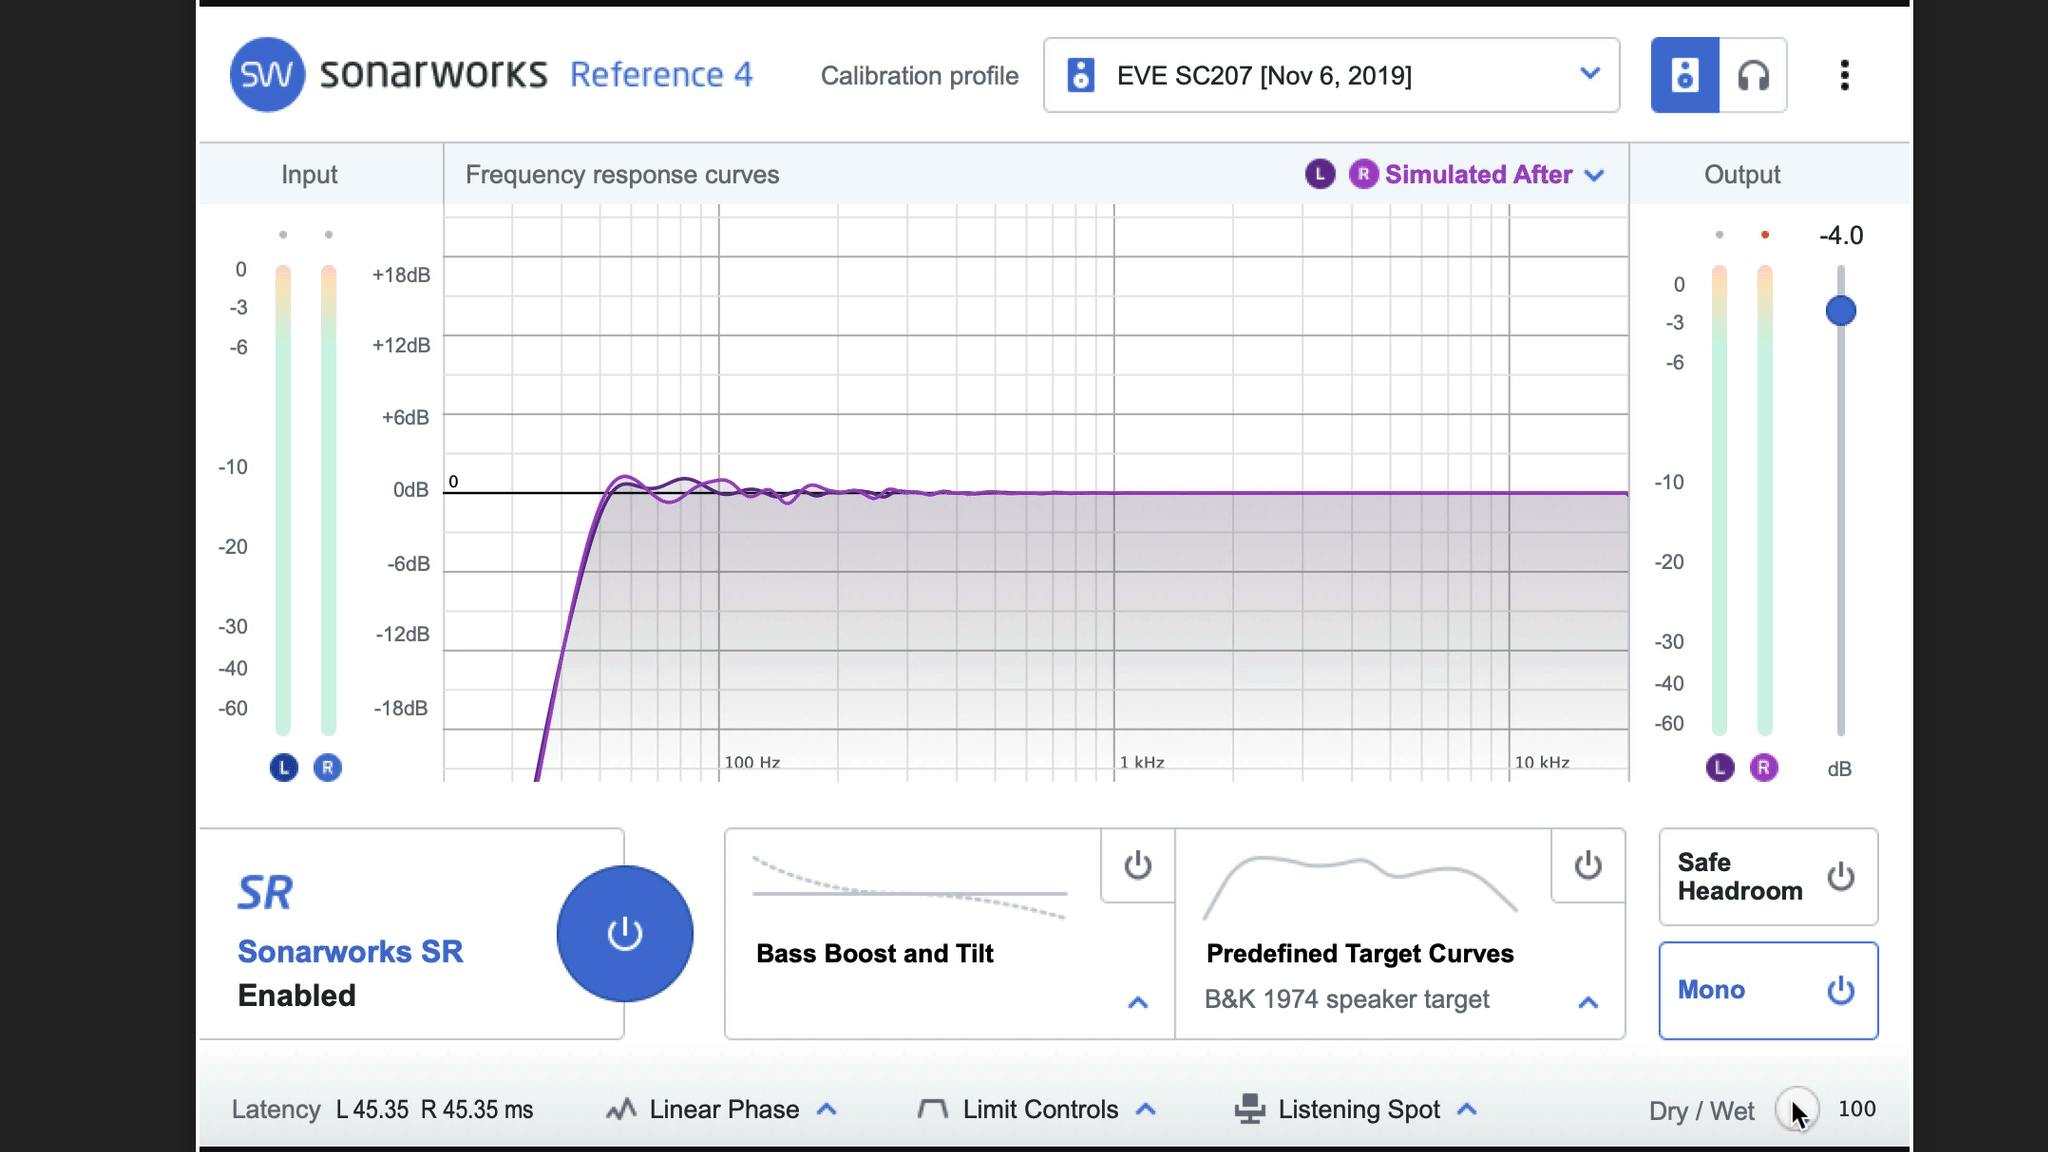 Getting The Most Out Of Sonarworks Reference 4's Settings - Sonarworks Blog